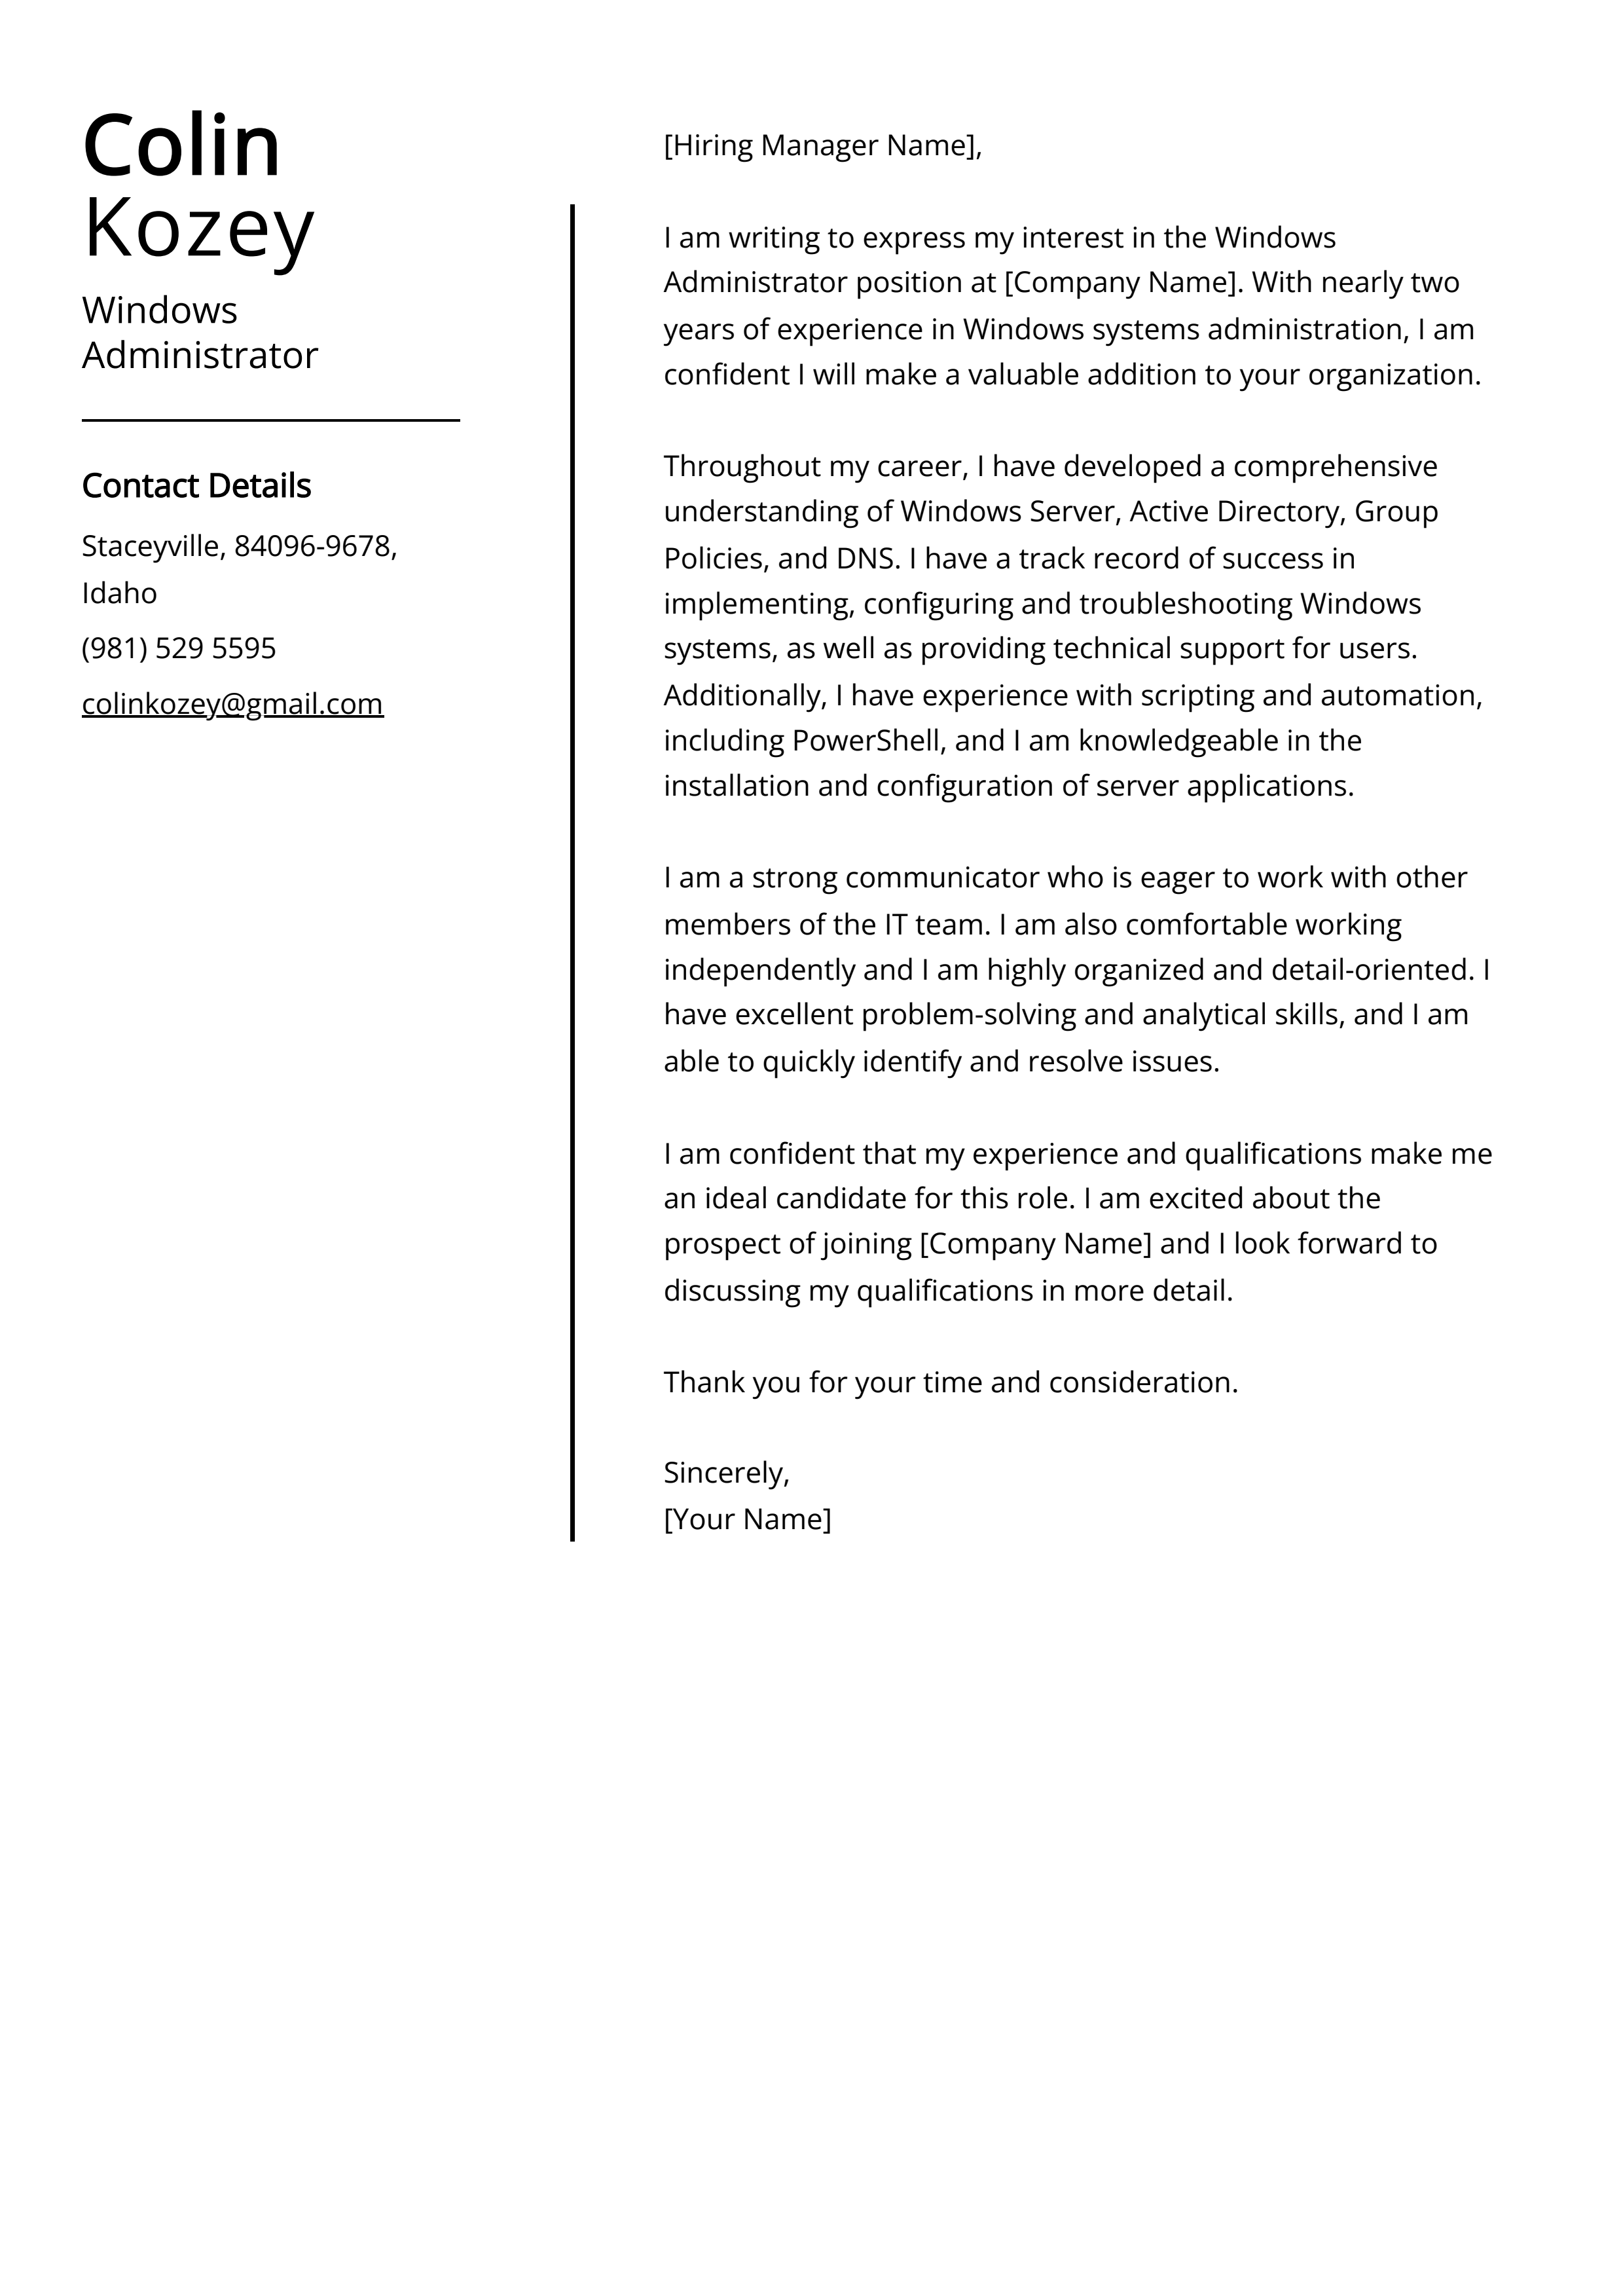 Windows Administrator Cover Letter Example